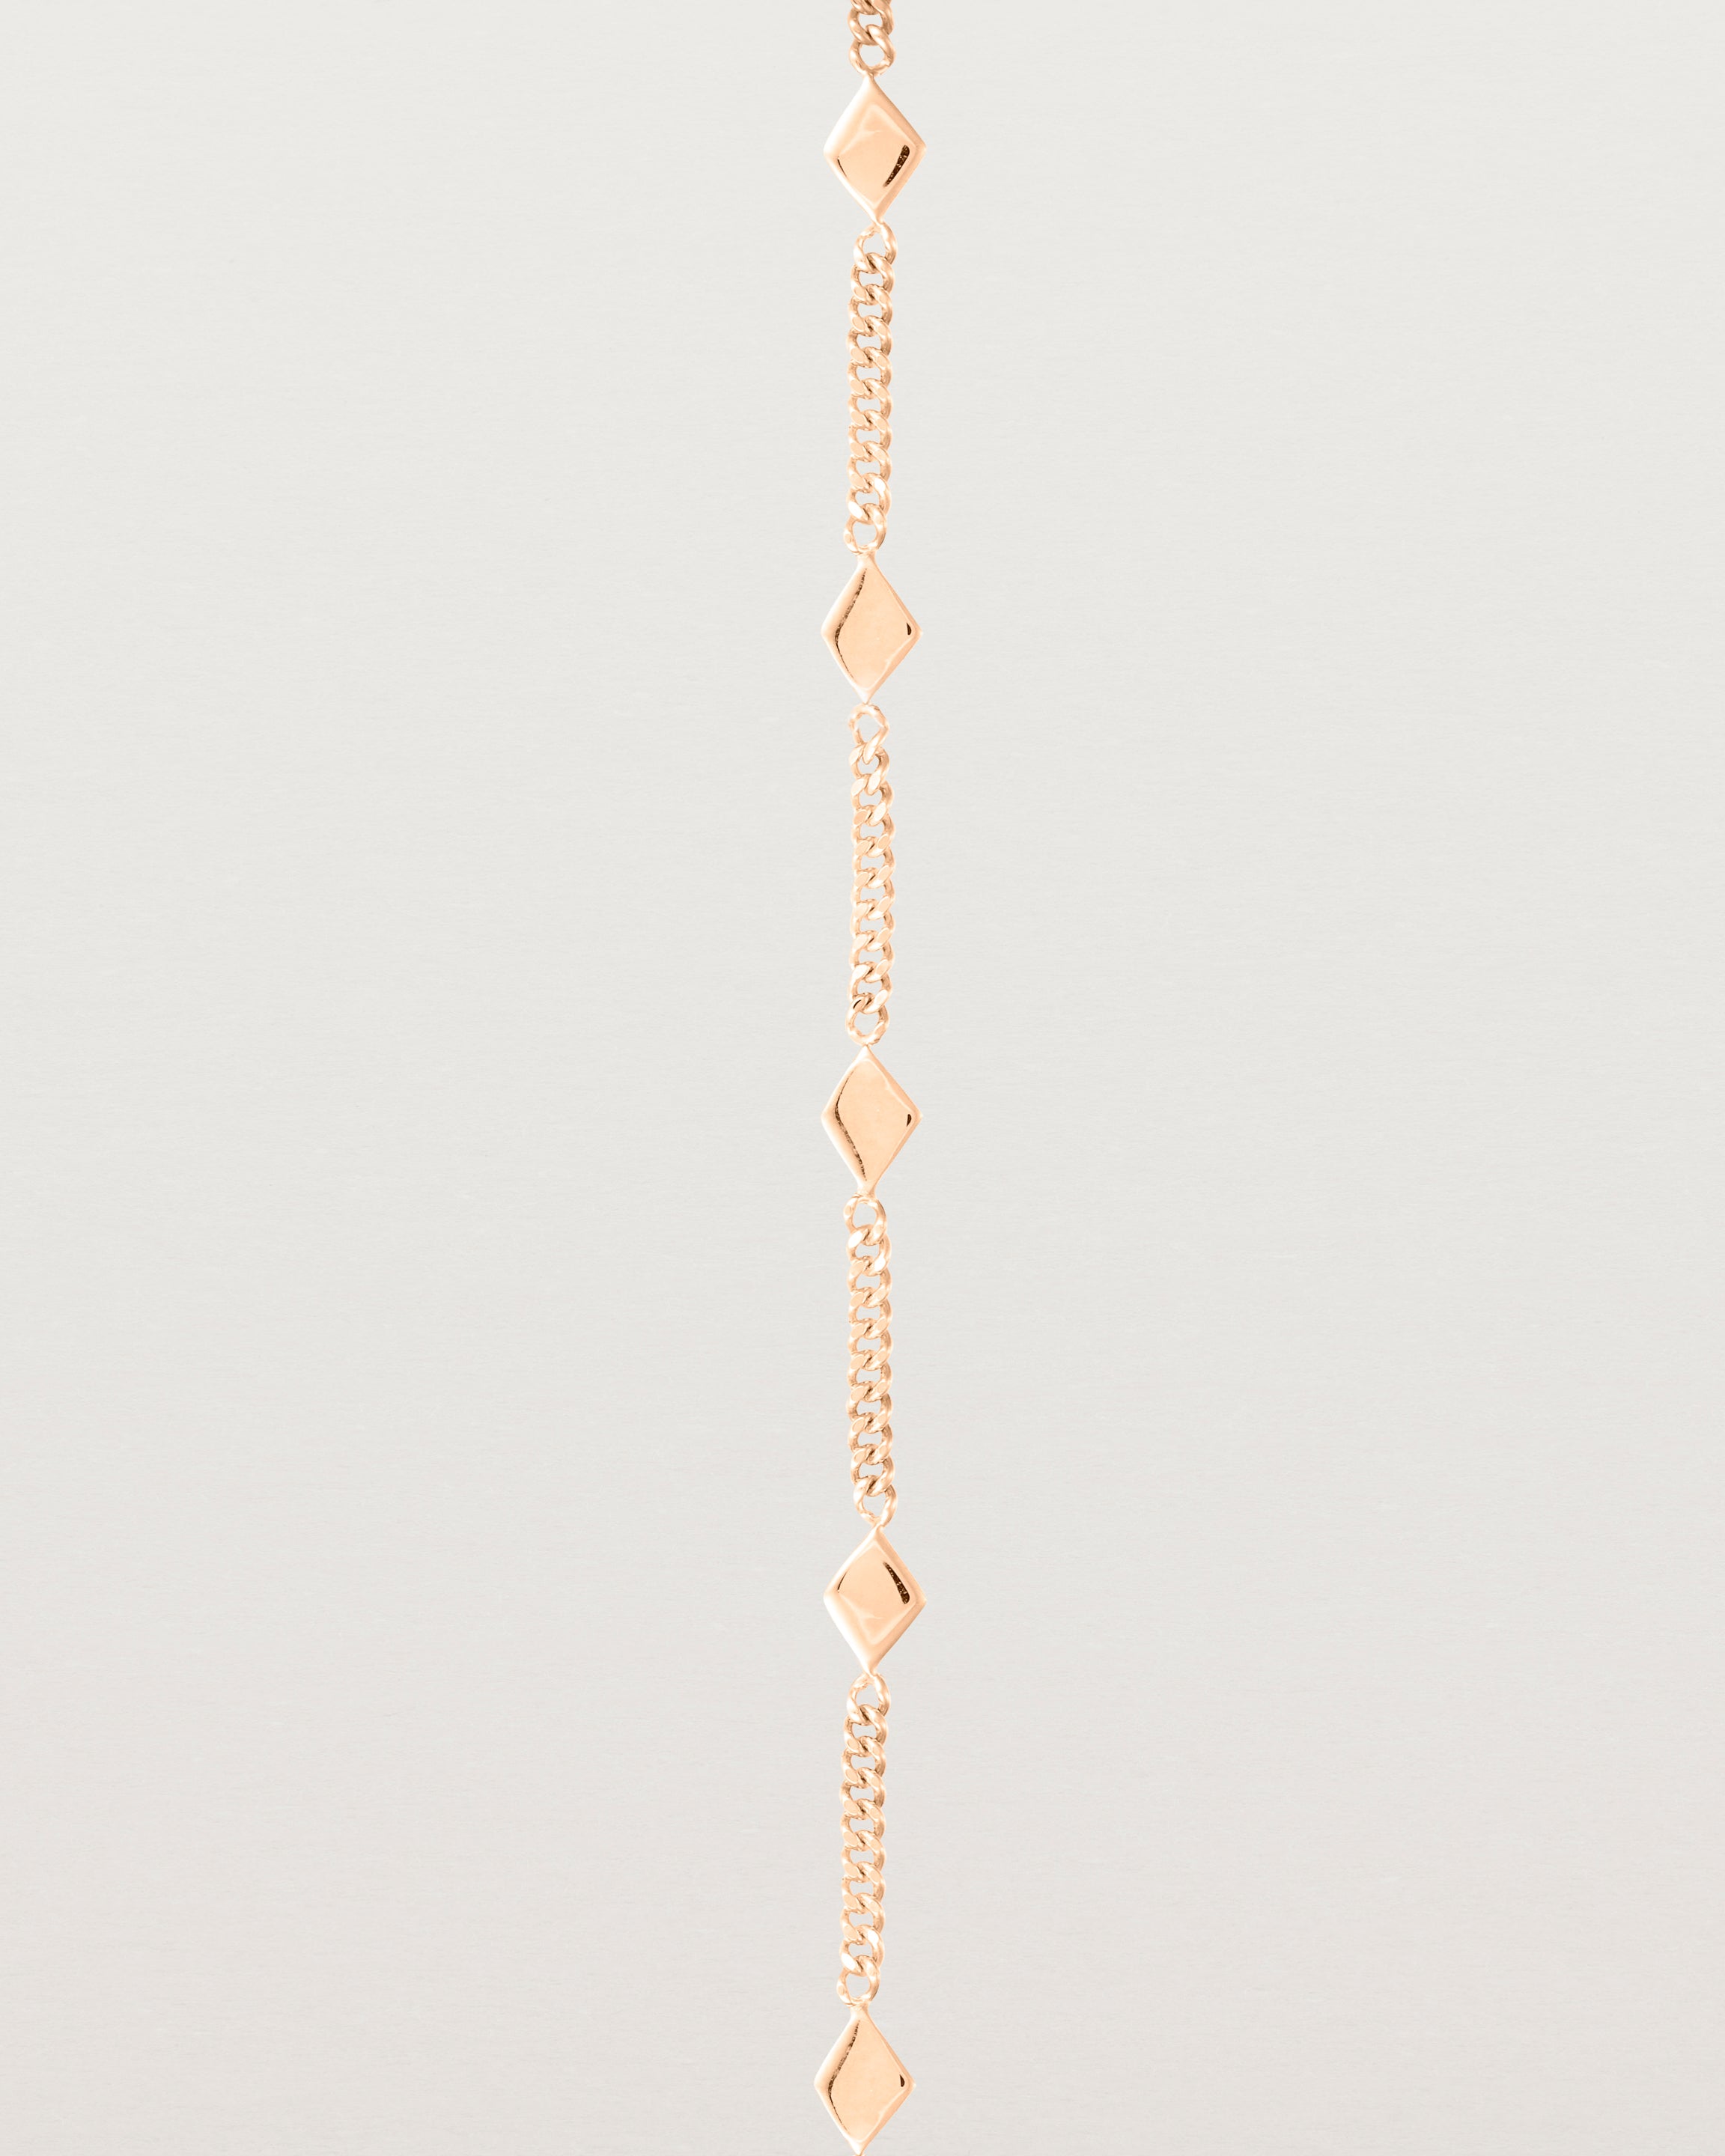 Close up of the Nuna Charm Bracelet in Rose Gold.